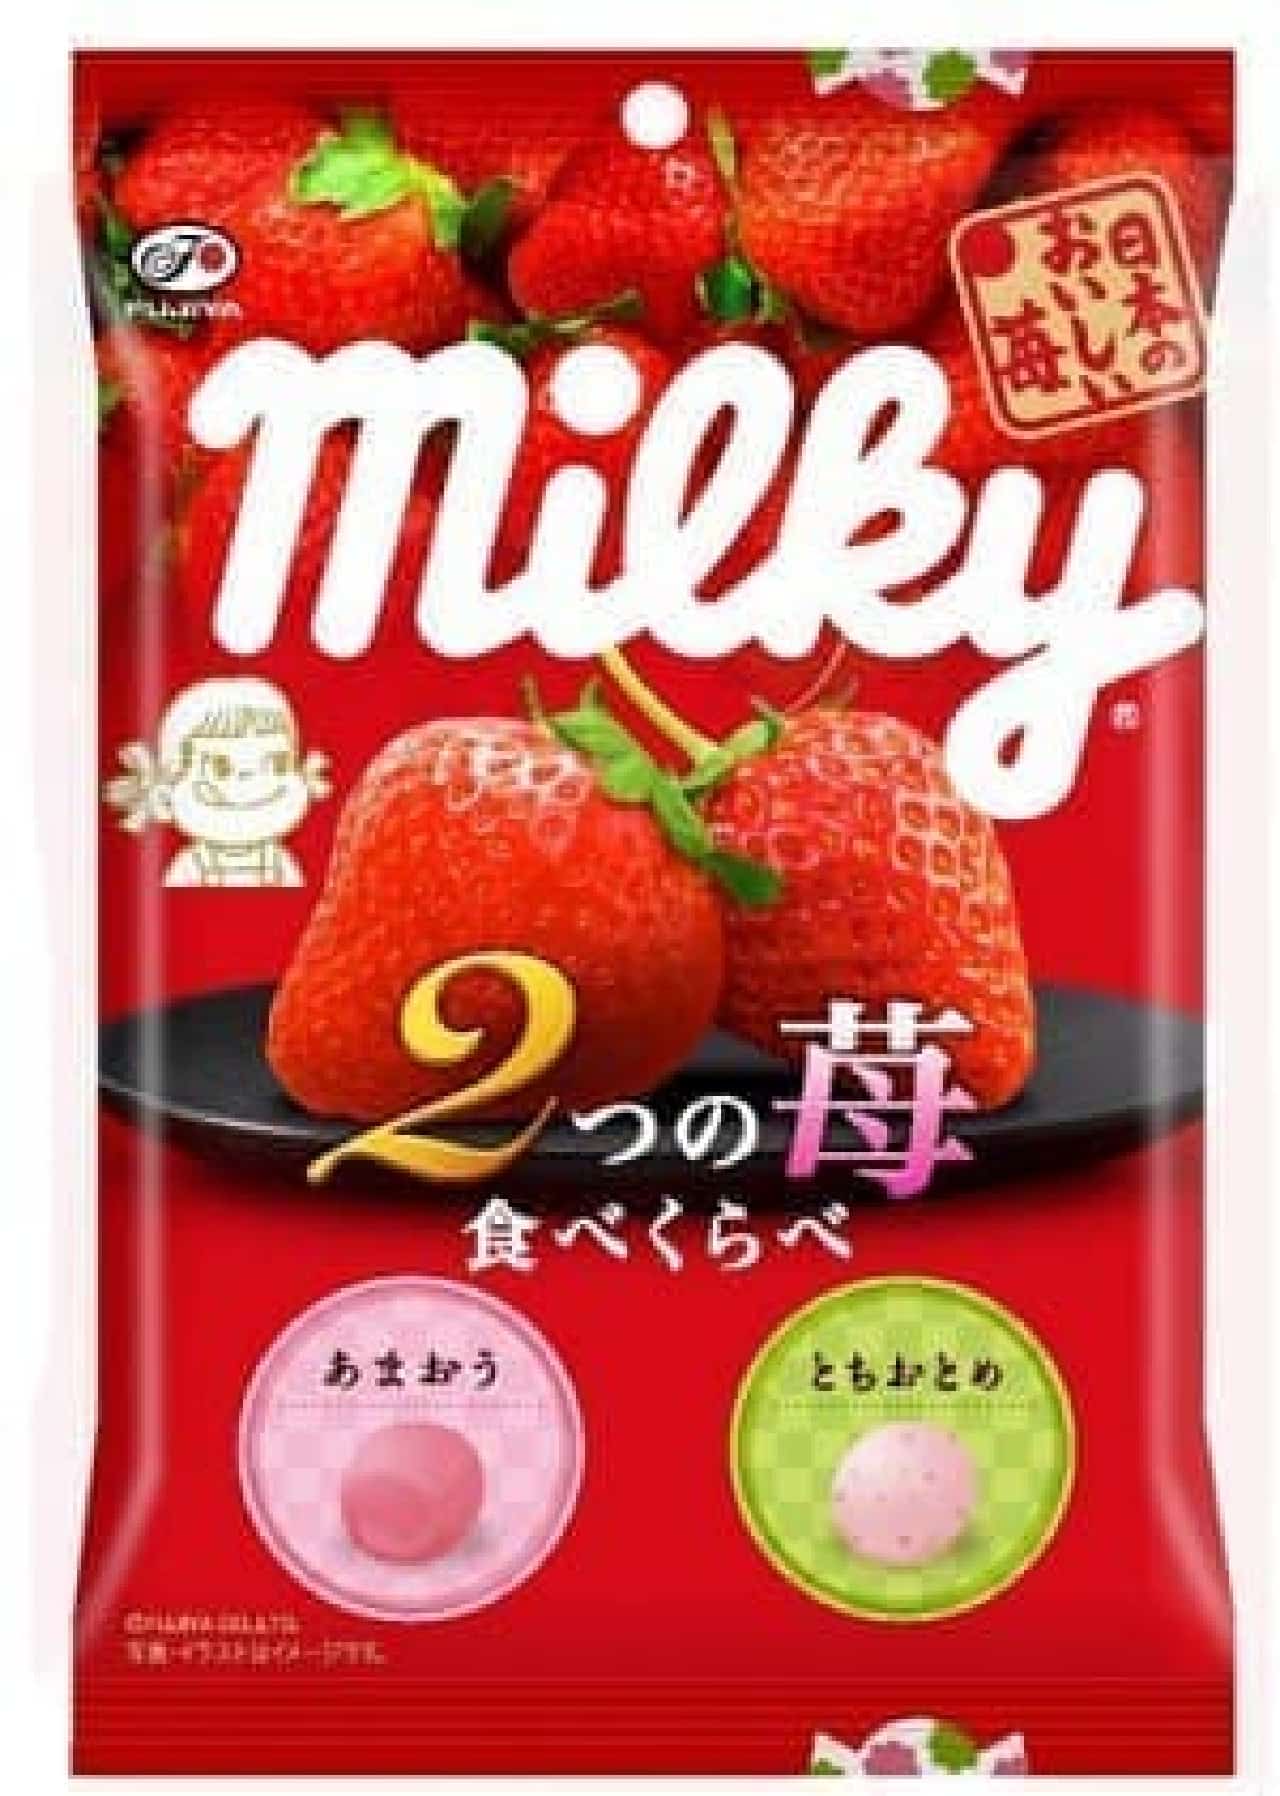 Fujiya "Milky (compared to eating two strawberries) bag"